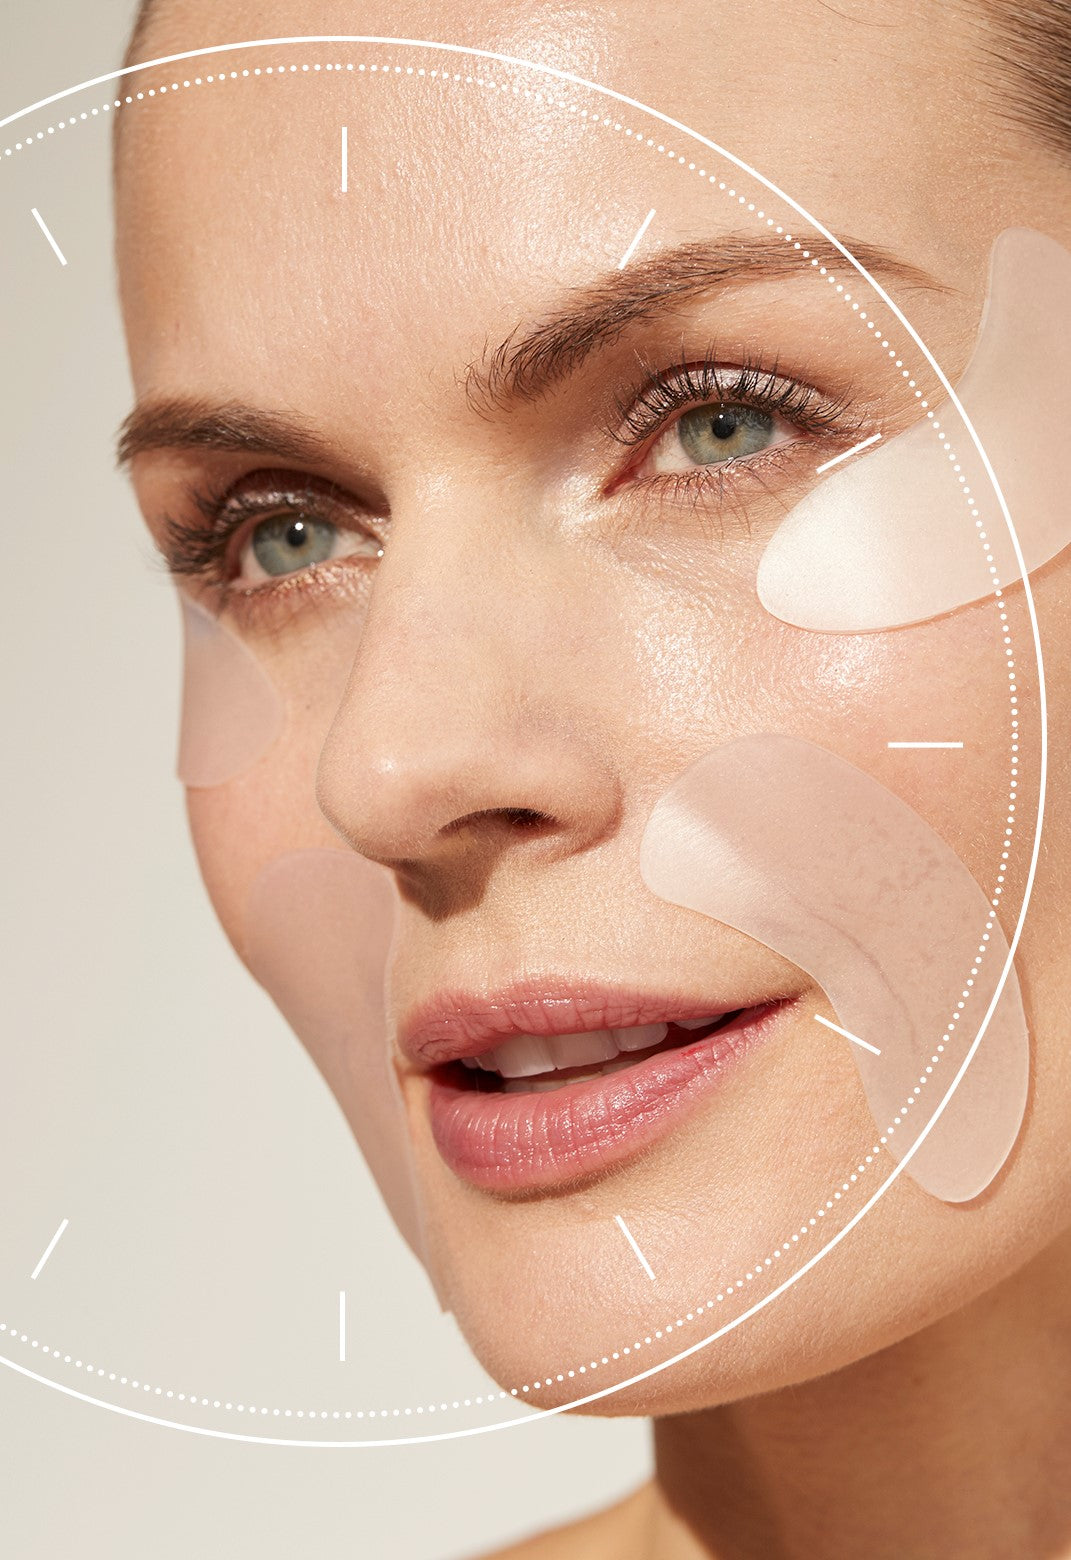 Non-Injectable Wrinkle Prevention - Is It Possible? – Shop Sesen Spa